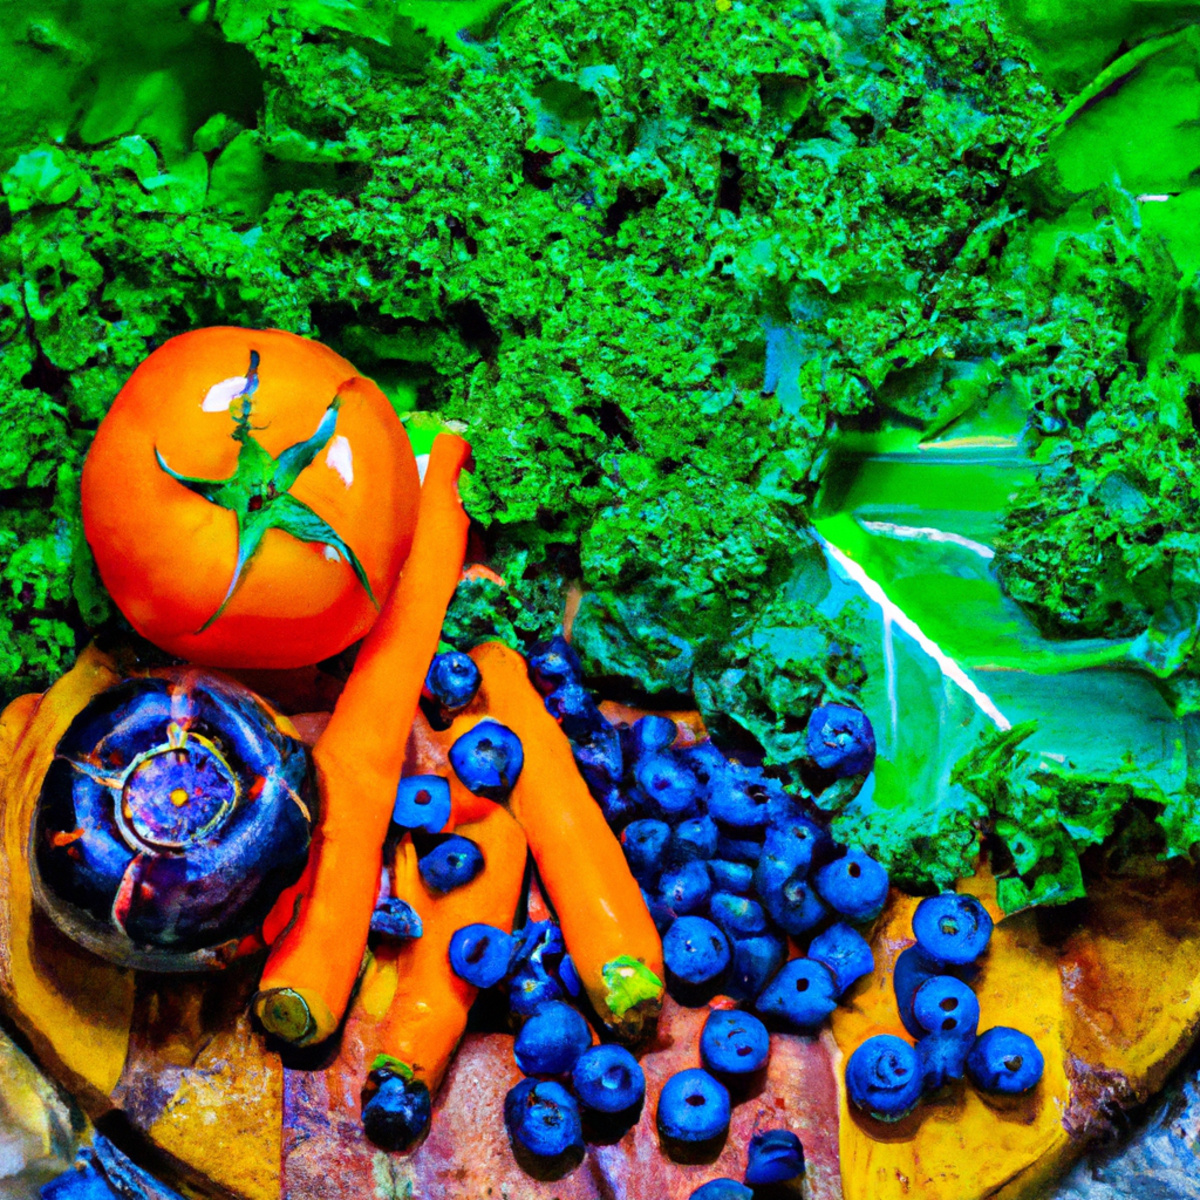 The photo depicts a wooden cutting board with an assortment of colorful fruits and vegetables arranged in an artful display. A ripe red tomato sits next to a bunch of vibrant green kale leaves, while a cluster of bright orange carrots and a handful of plump blueberries complete the scene. The natural textures and hues of the produce are highlighted by the soft lighting, making the viewer feel as though they could reach out and pluck a piece of fresh produce from the board. The image perfectly captures the essence of the article's message about the importance of incorporating organic foods into one's diet for optimal health and wellness.